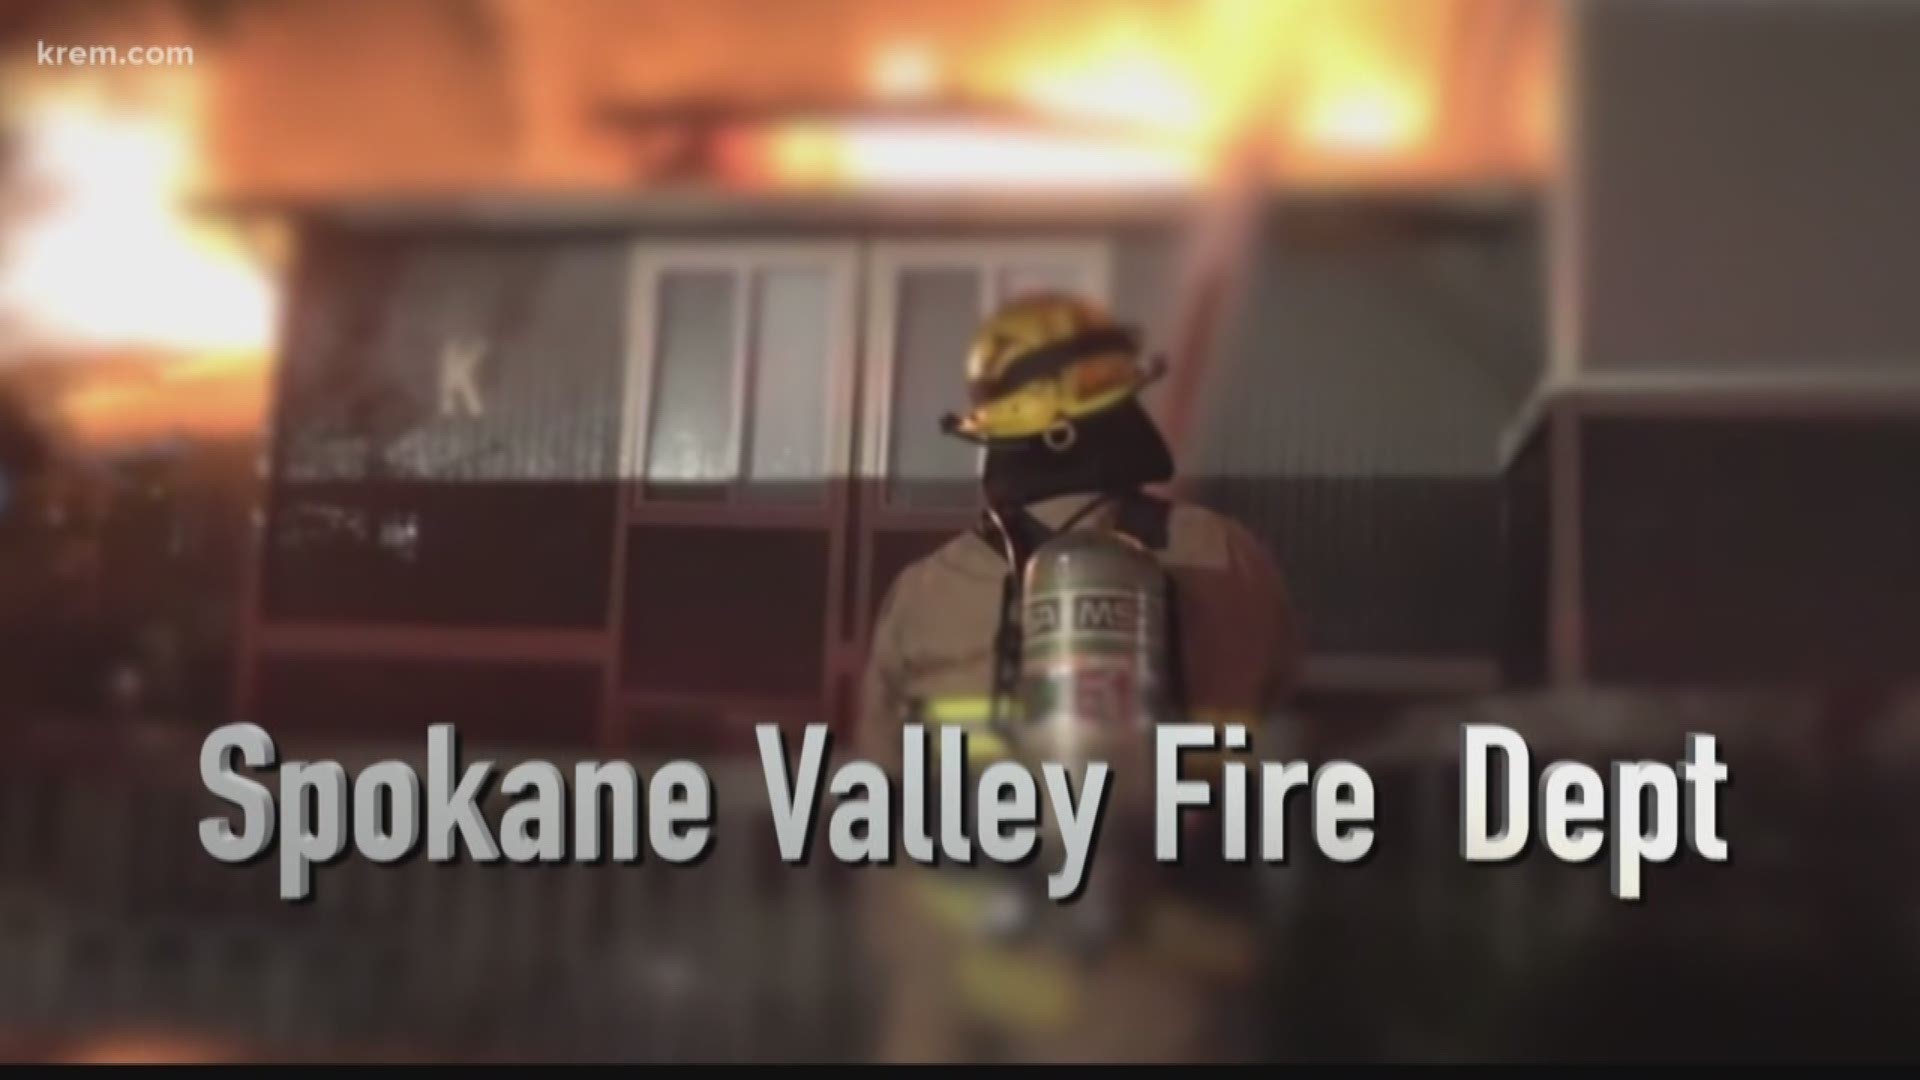 Spokane County will have a special election on February 12. Proposition 1 in Spokane Valley would renew the fire department's maintenance and operations levy for another four years.